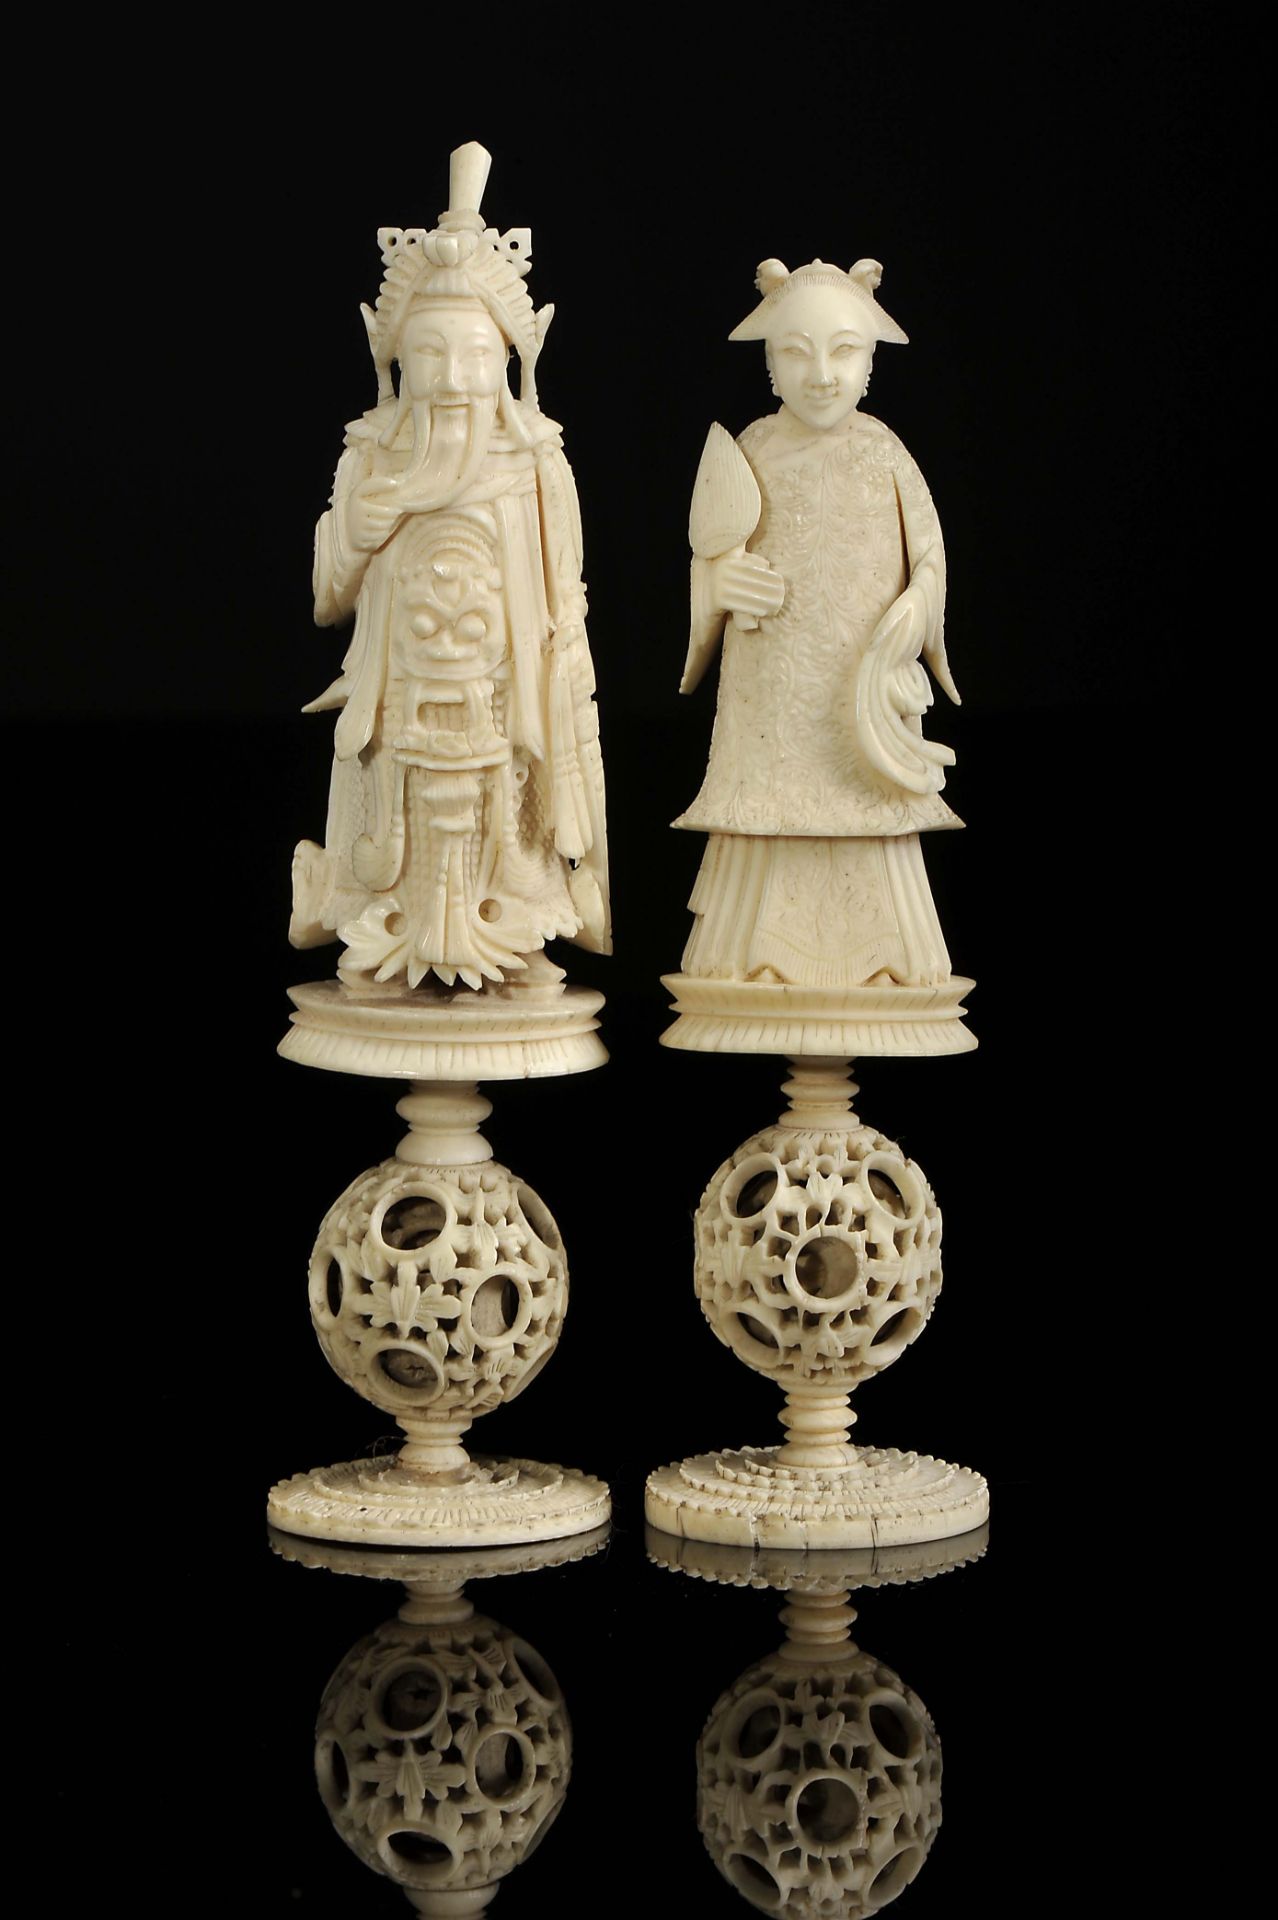 Six Chess Pieces, "Three Kings" and "Three Queens" on "Ball of happiness" - Image 7 of 7